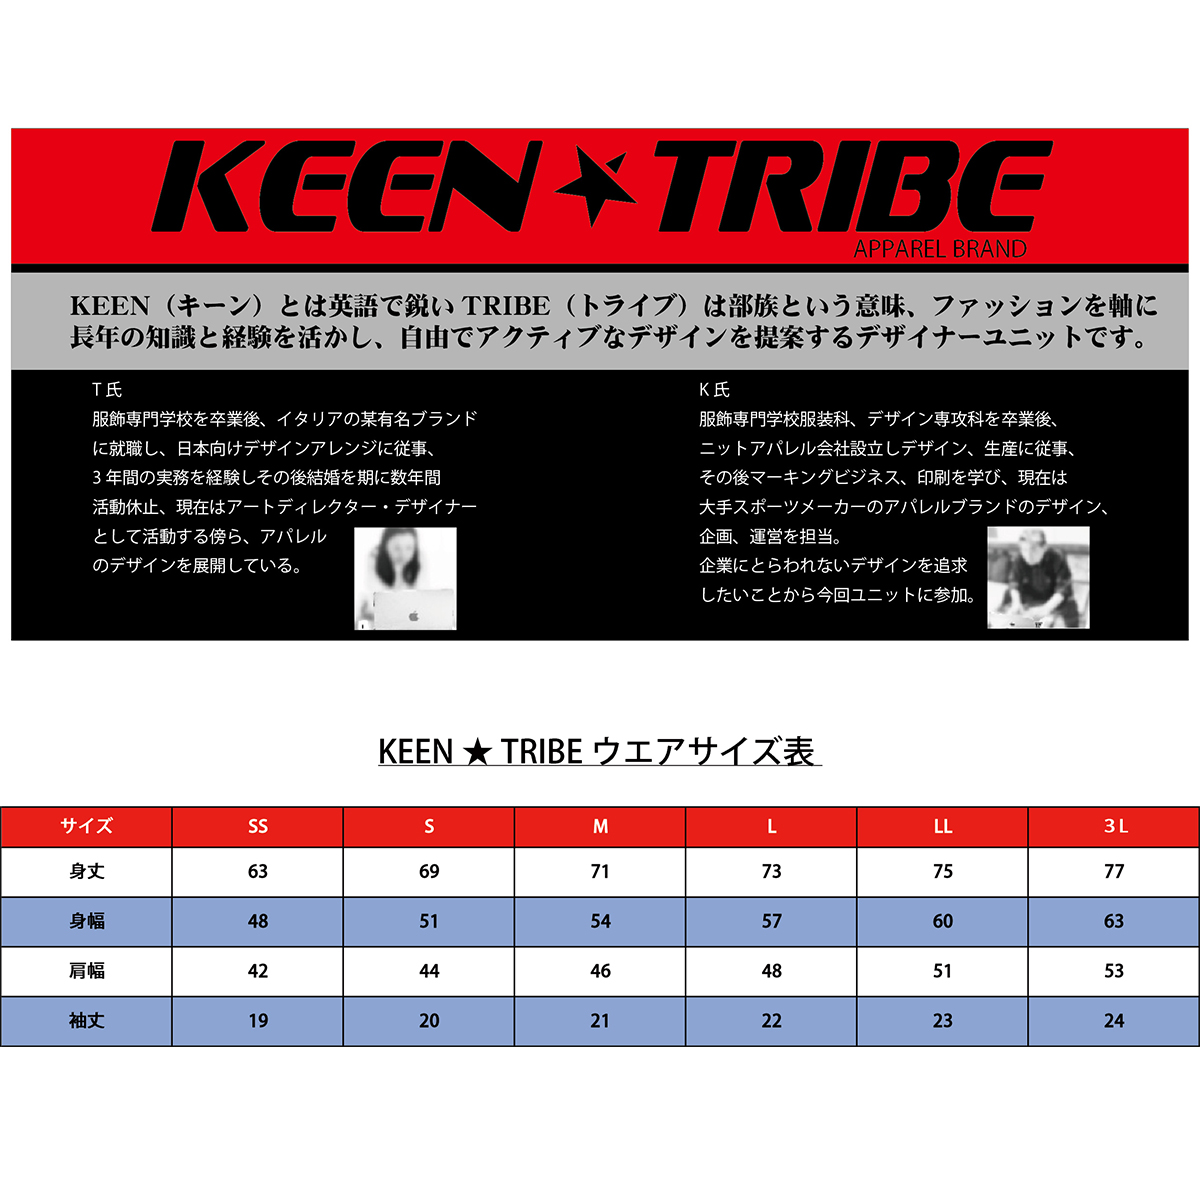 KEEN ★ TRIBE　KT-79(受注生産)